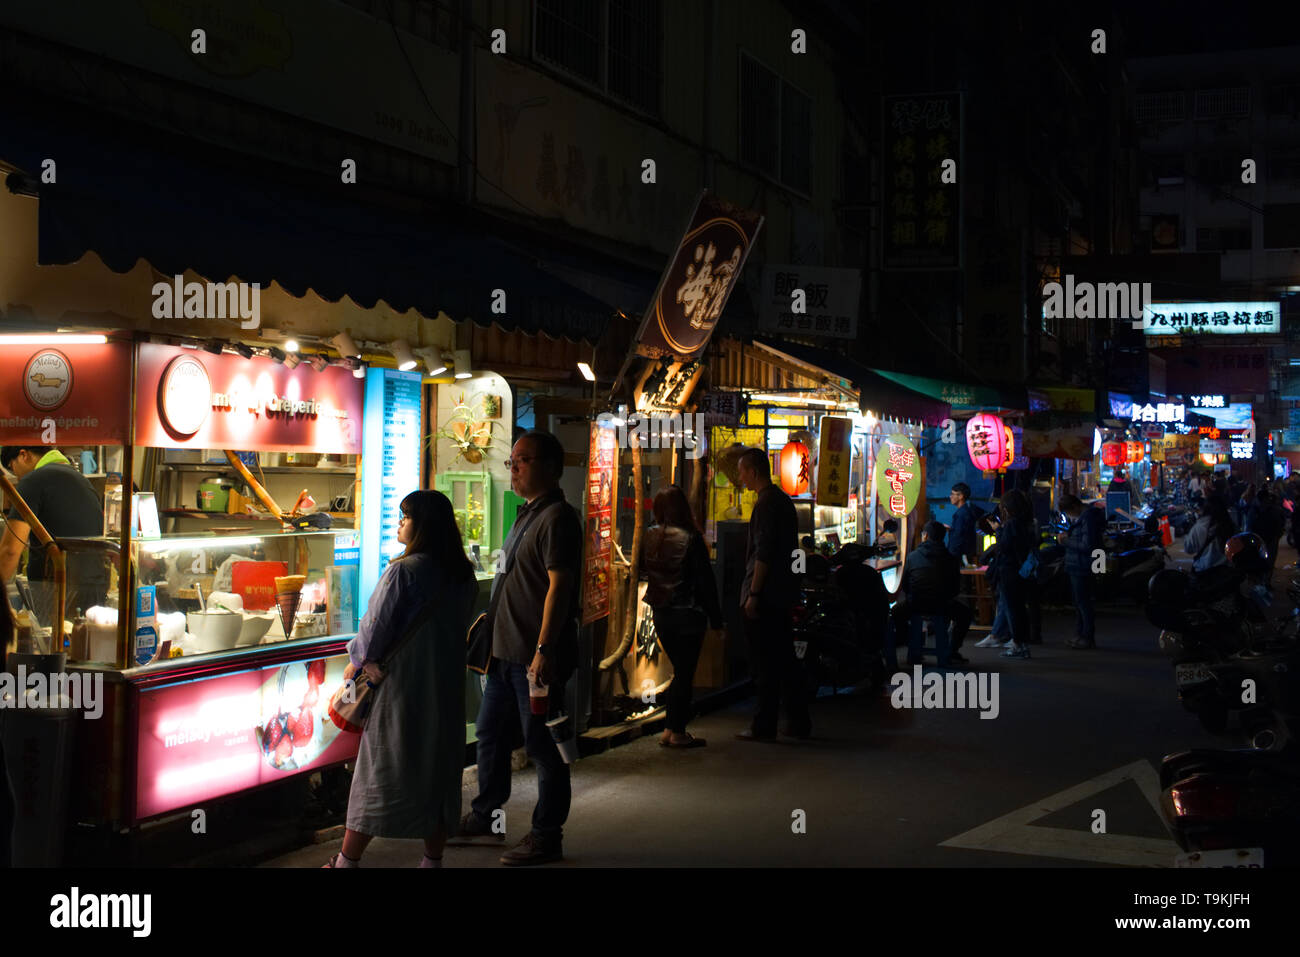 A visit of asian night markets Stock Photo